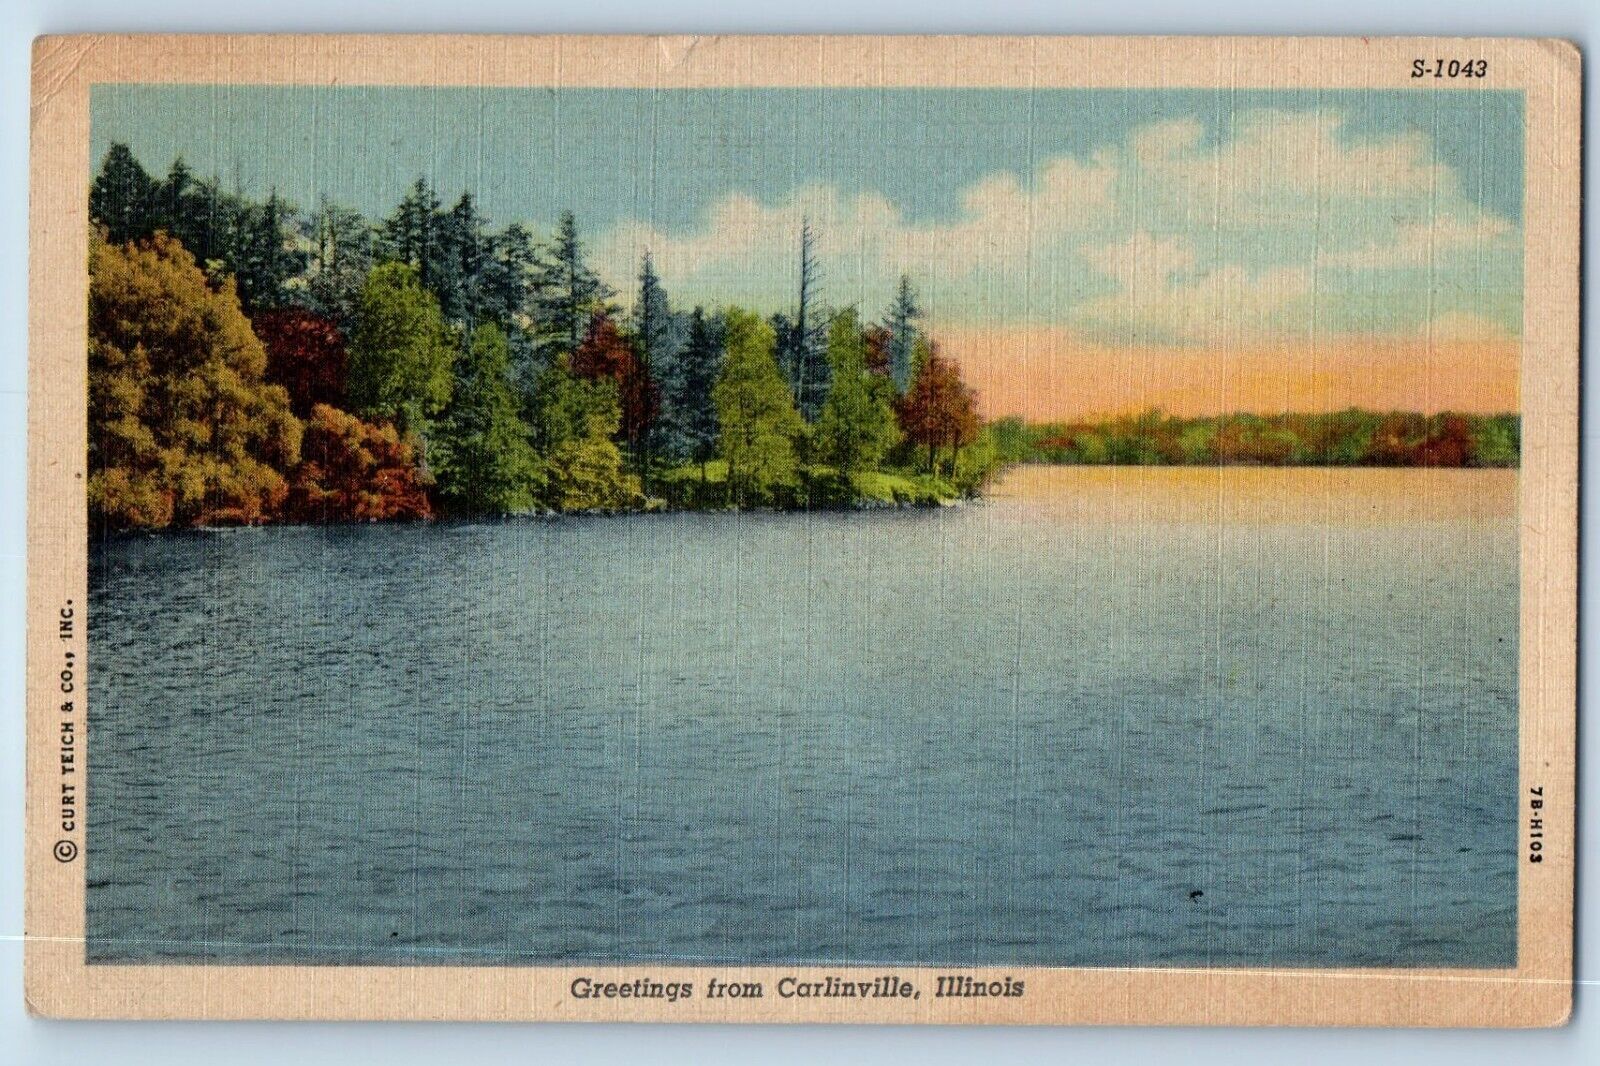 Carlinville Illinois Postcard Greetings Aerial View Lake Trees Scenic View 1951